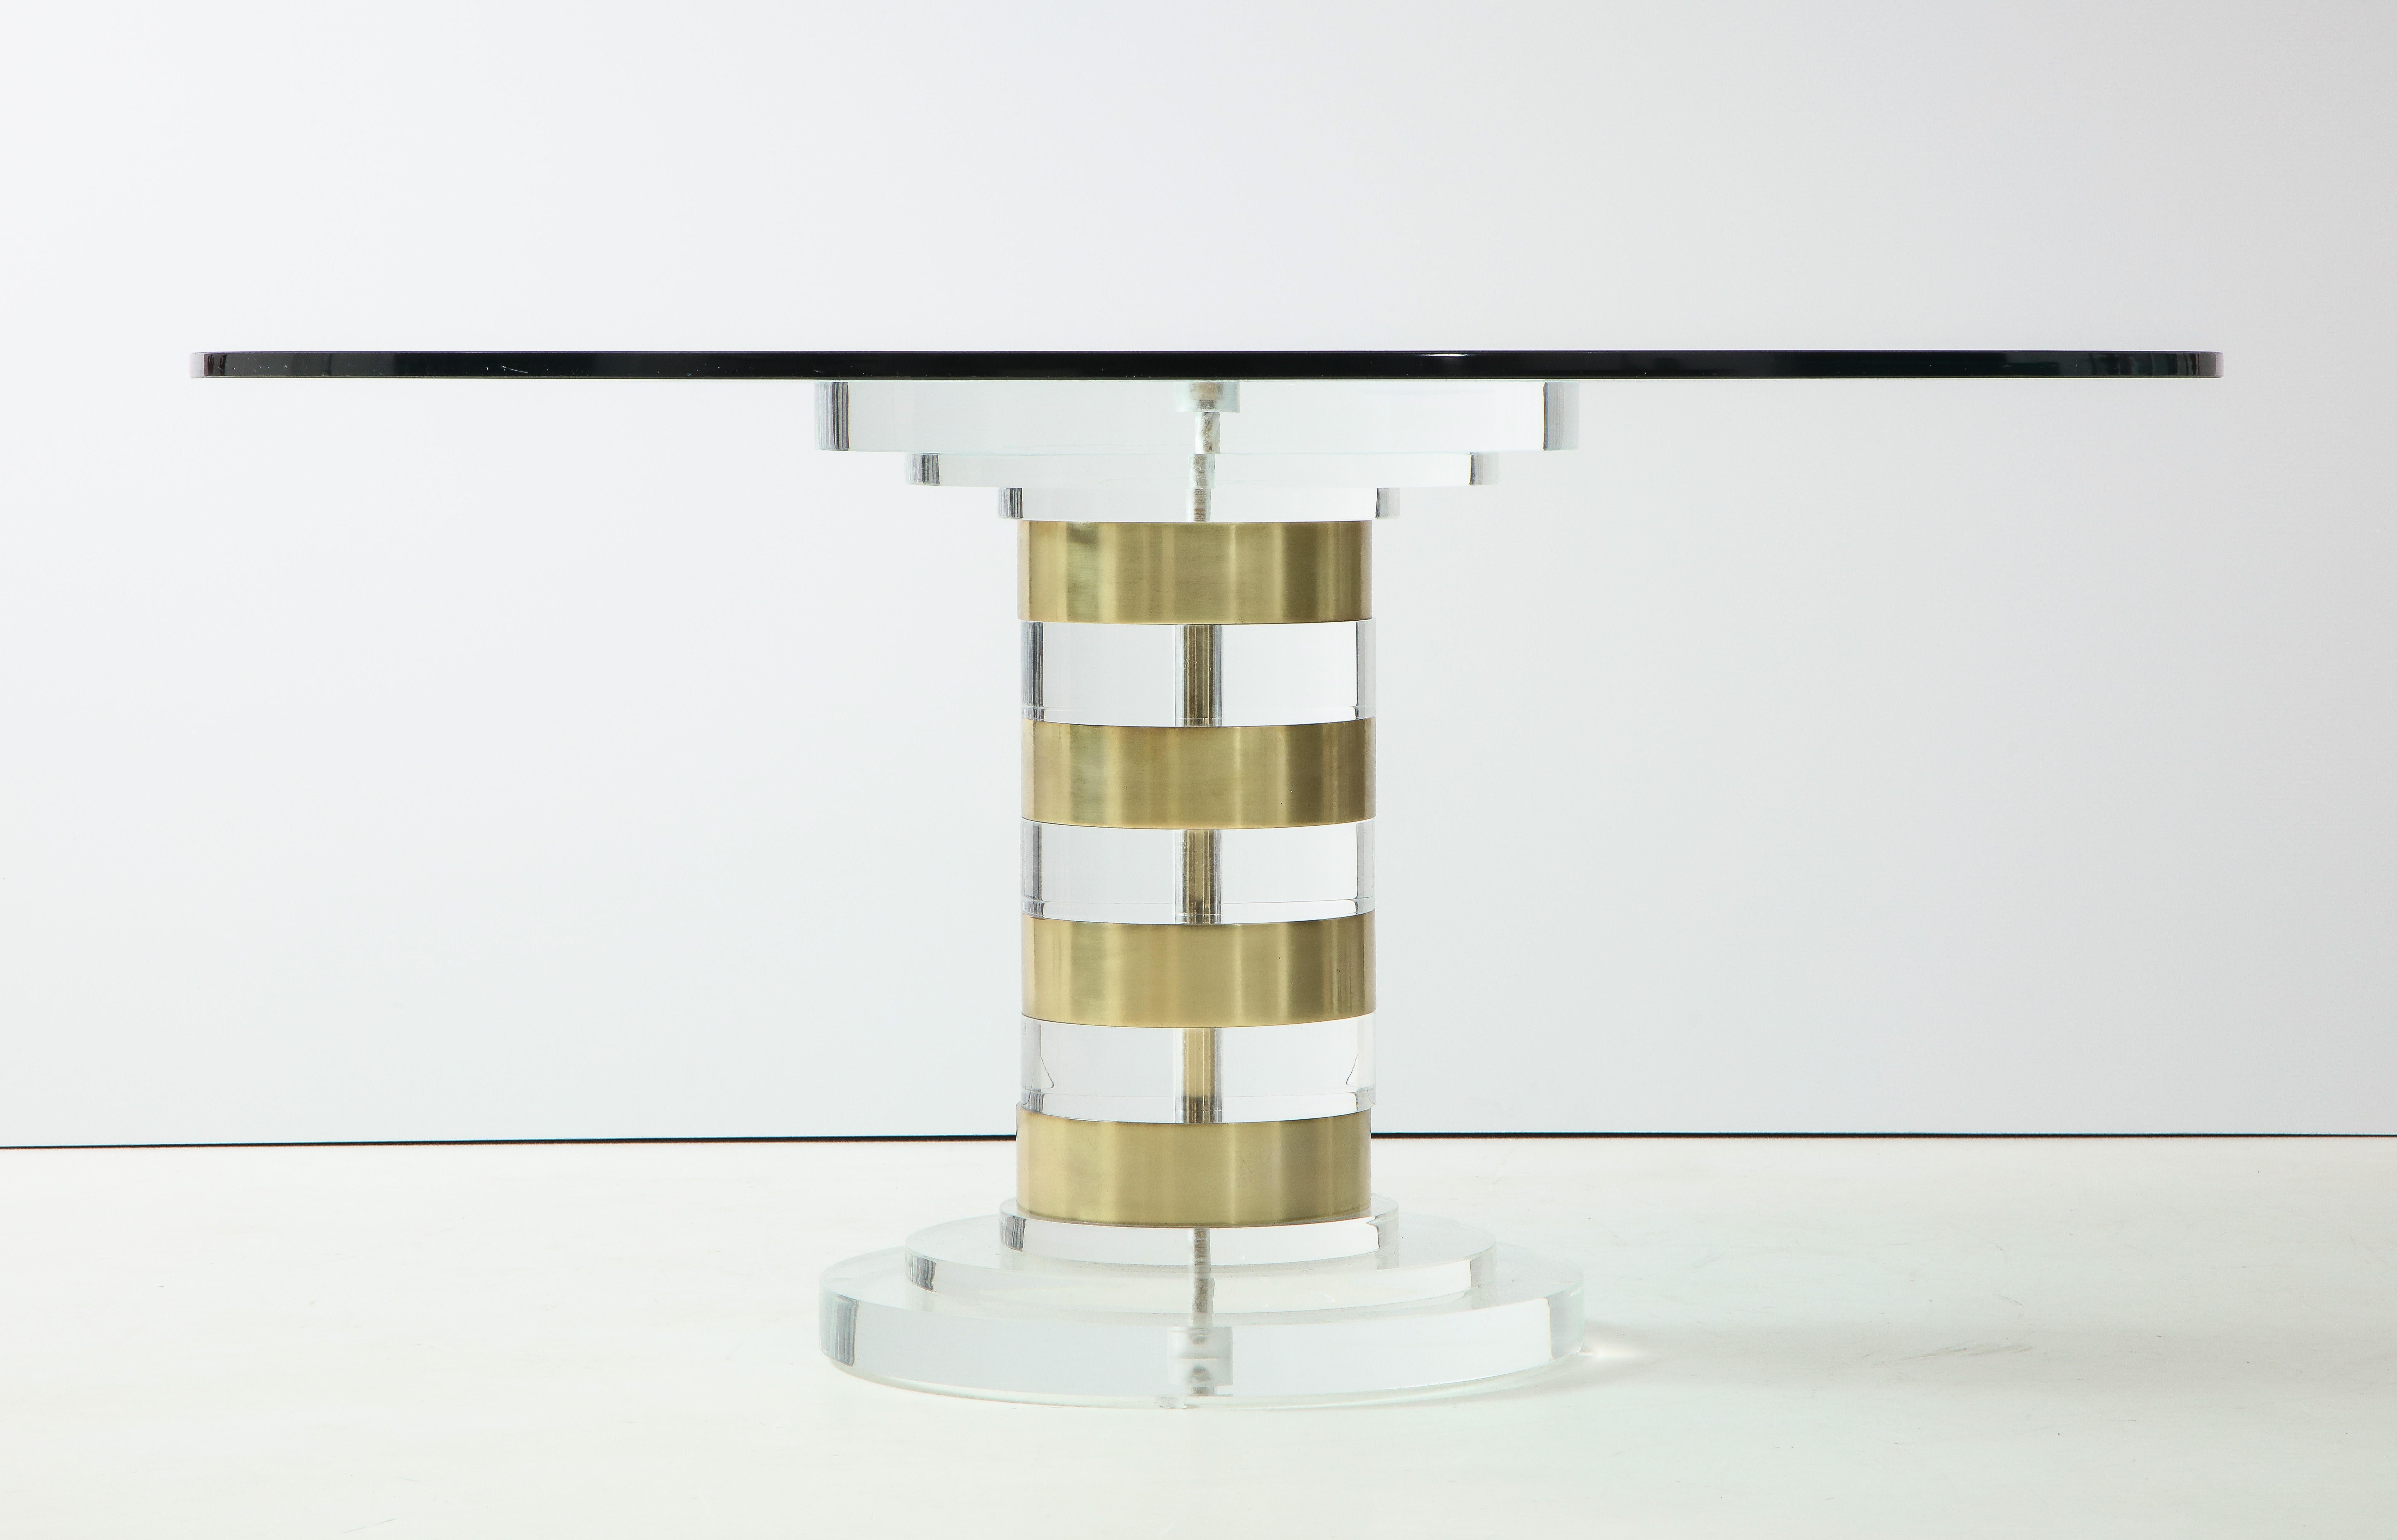 Beautiful lucite and brass dining table / side table by Lion in Frost.
The table can be used as a dining table or a side table and comes with a 60